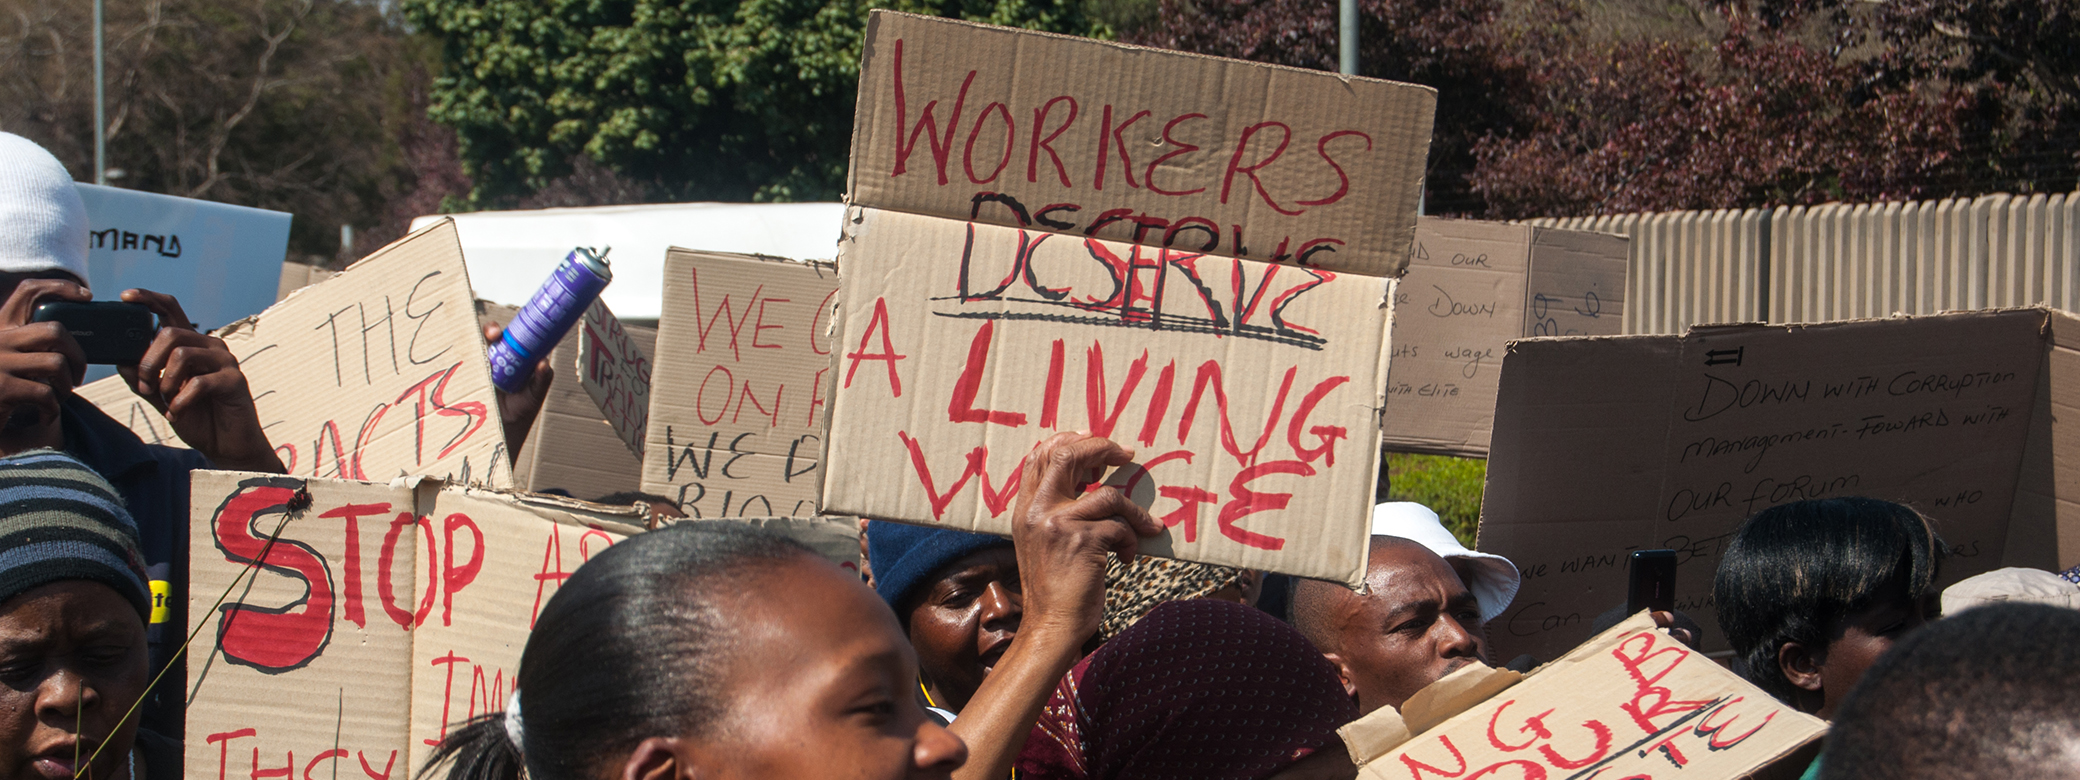 Protesters at a rally hold up signs about deserving a living wage. Photo credit: Meraj Chhaya/Flickr